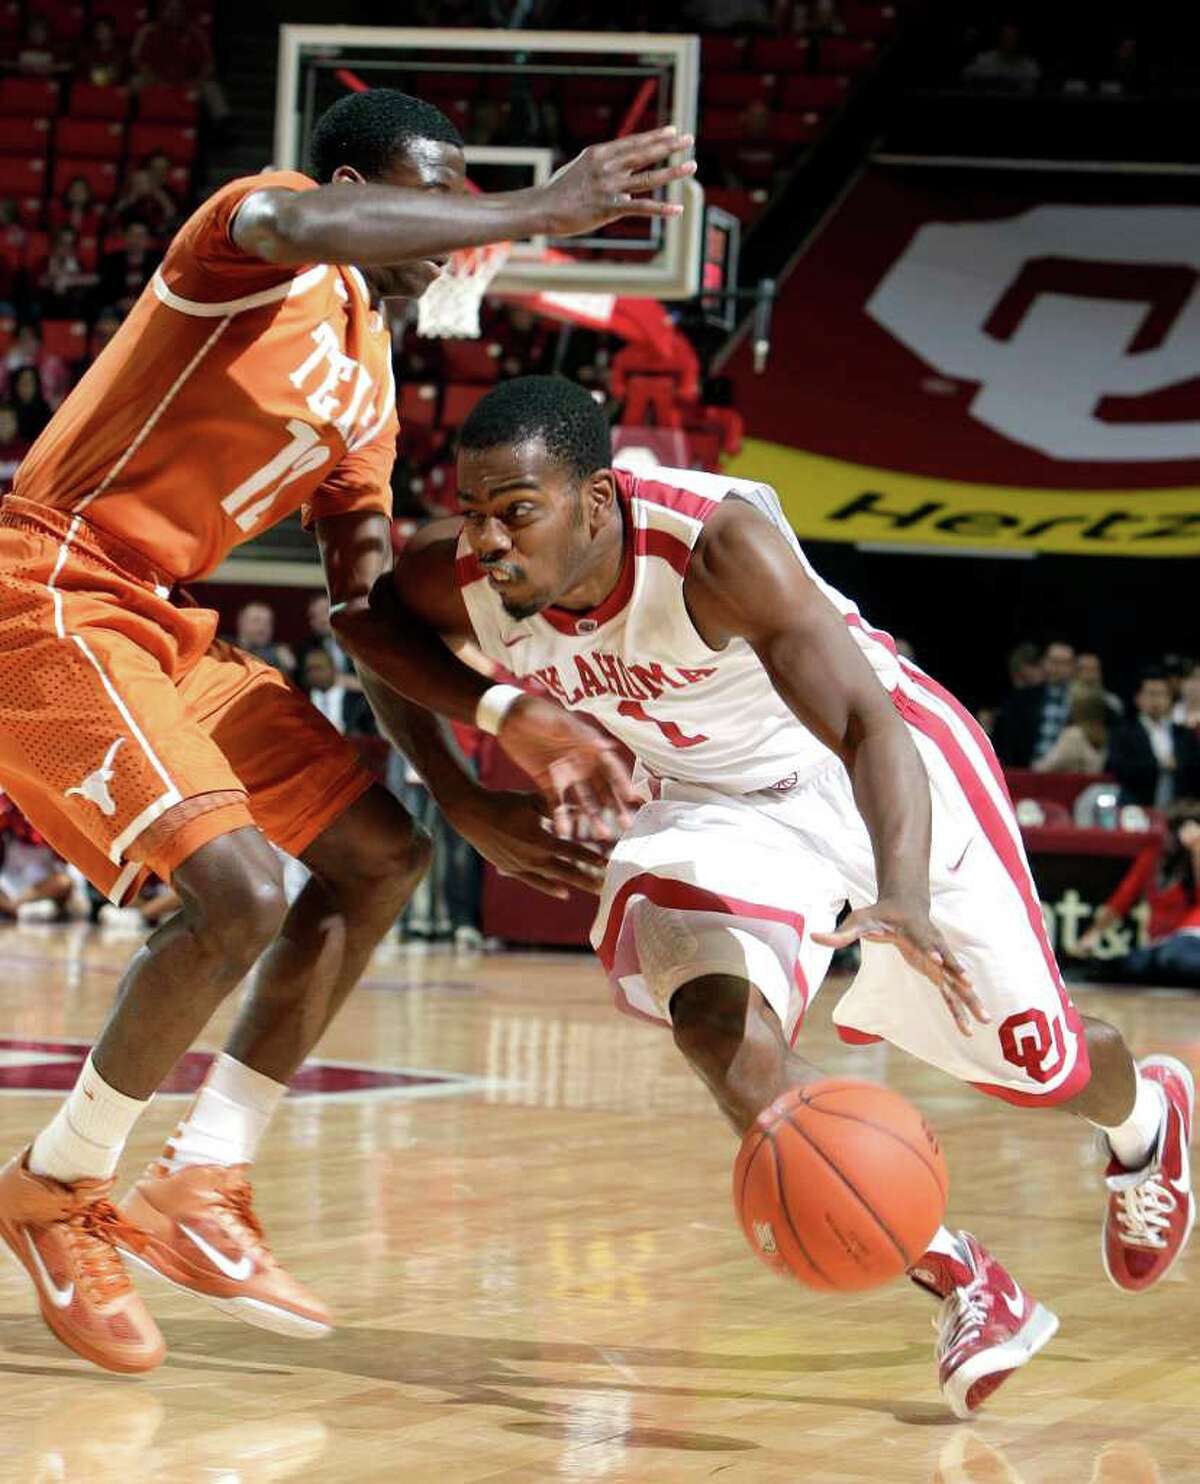 Oklahoma's Sam Grooms (1) tries to get by Texas' Myck Kabongo (12) during an NCAA college basketball game at the Lloyd Noble Center in Norman, Okla., Tuesday, Feb. 14, 2012. (AP Photo/The Oklahoman, Sarah Phipps) TABLOIDS OUT